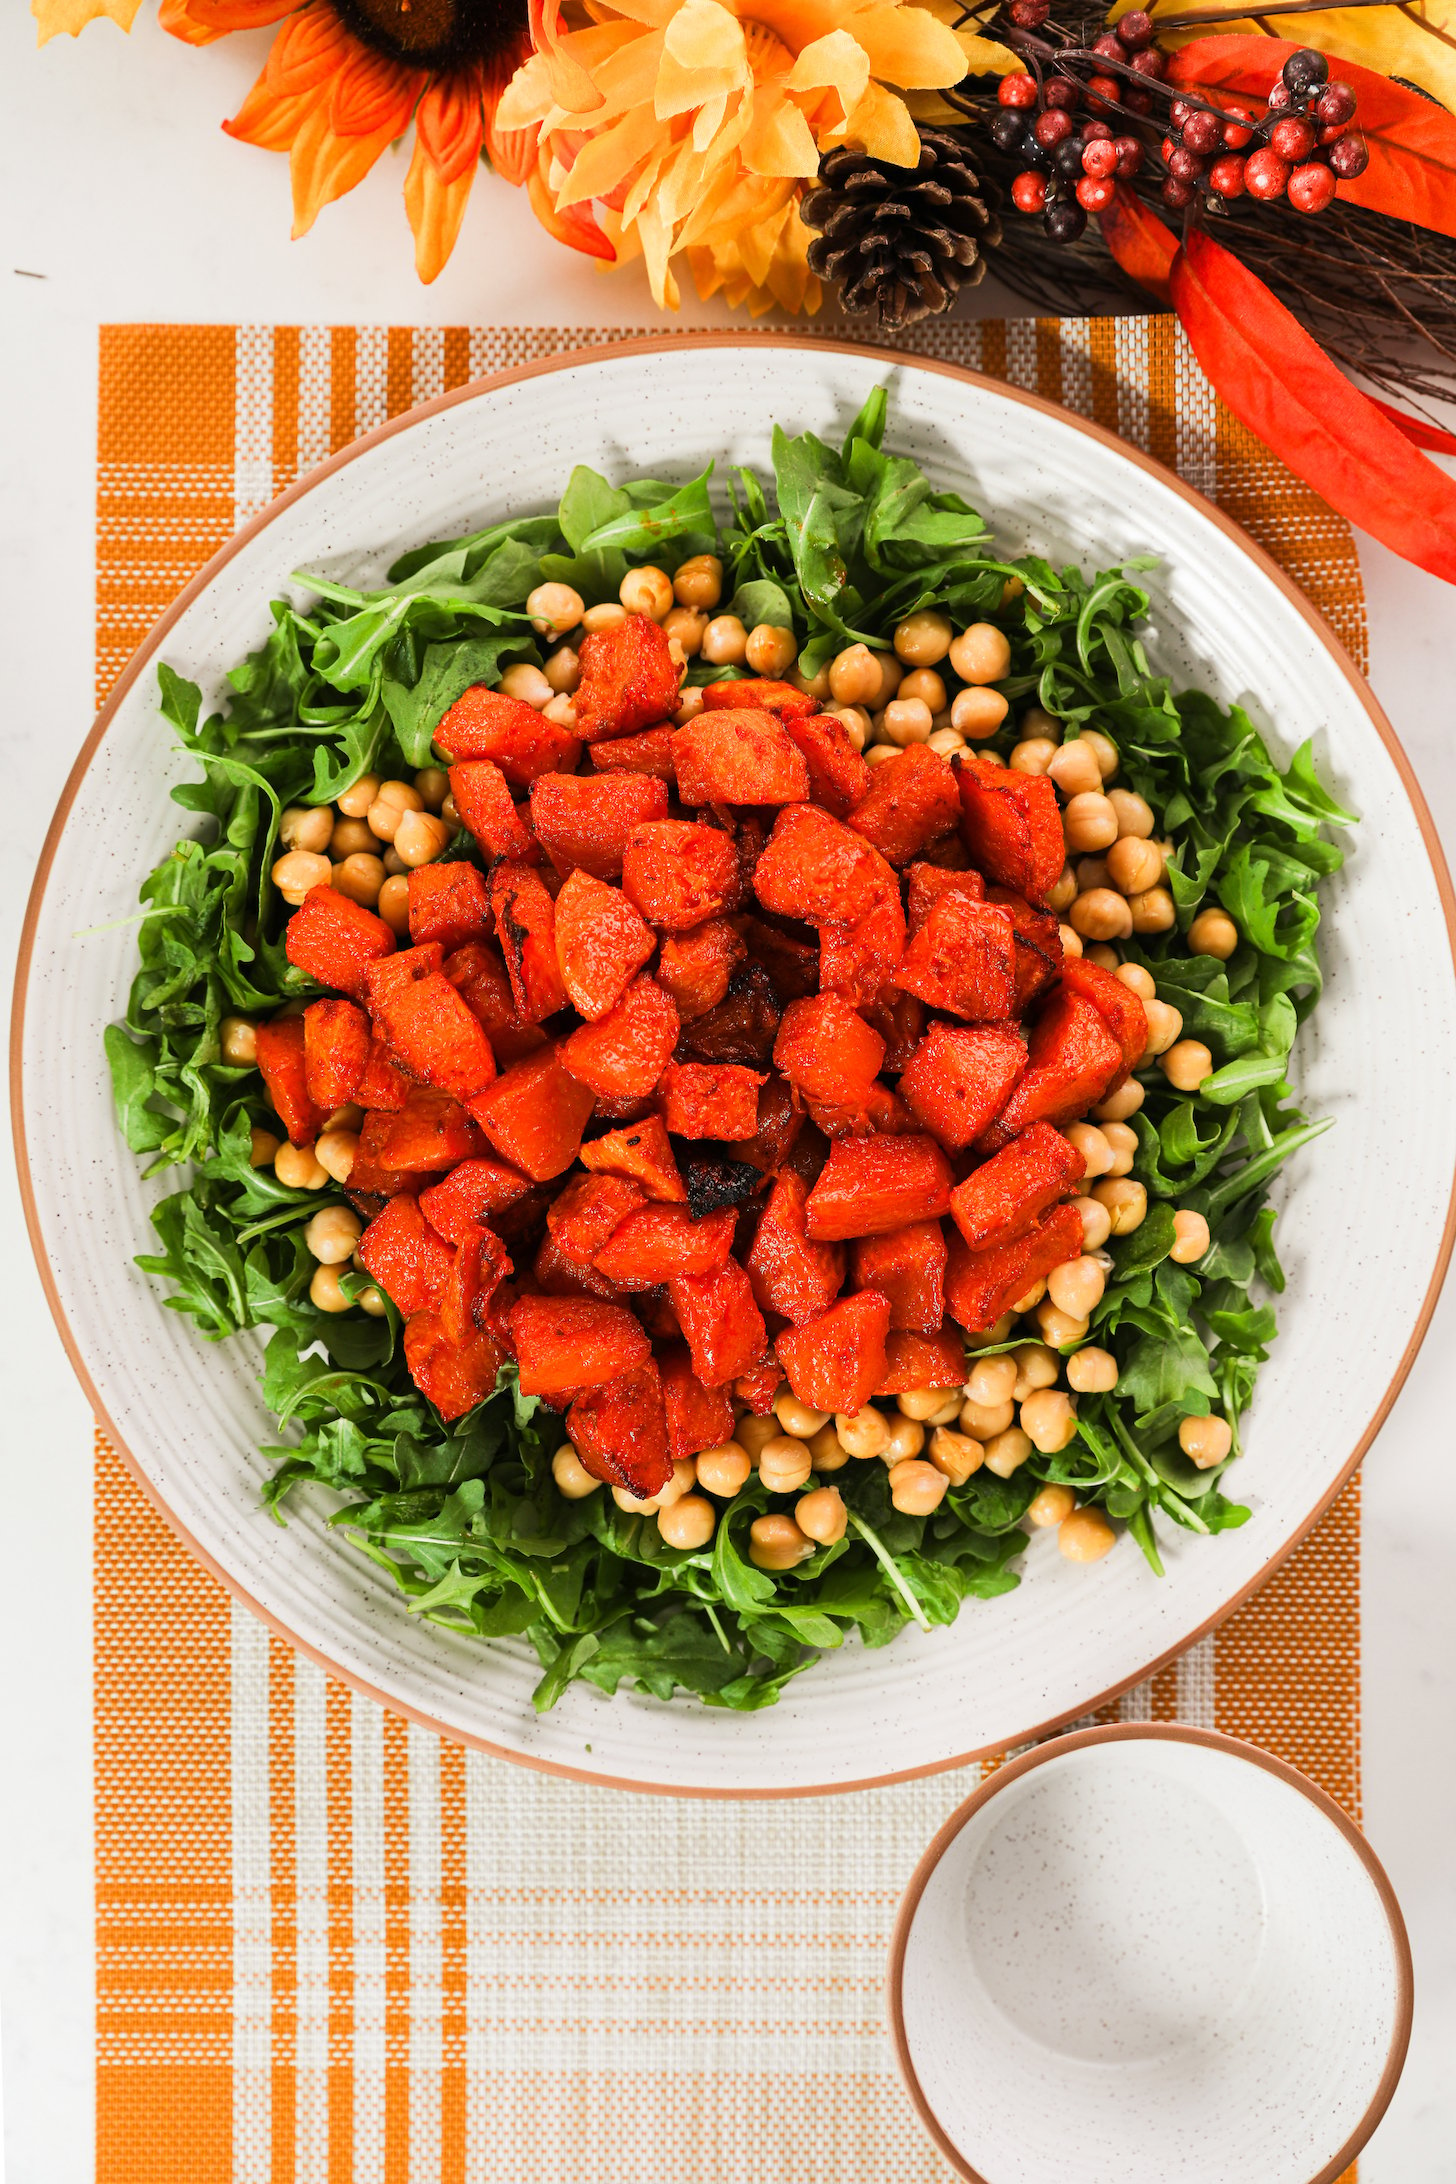 A large plate with a bed of arugula, chickpeas, and roasted pumpkin pieces, set on a placemat with orange and yellow flowers nearby.